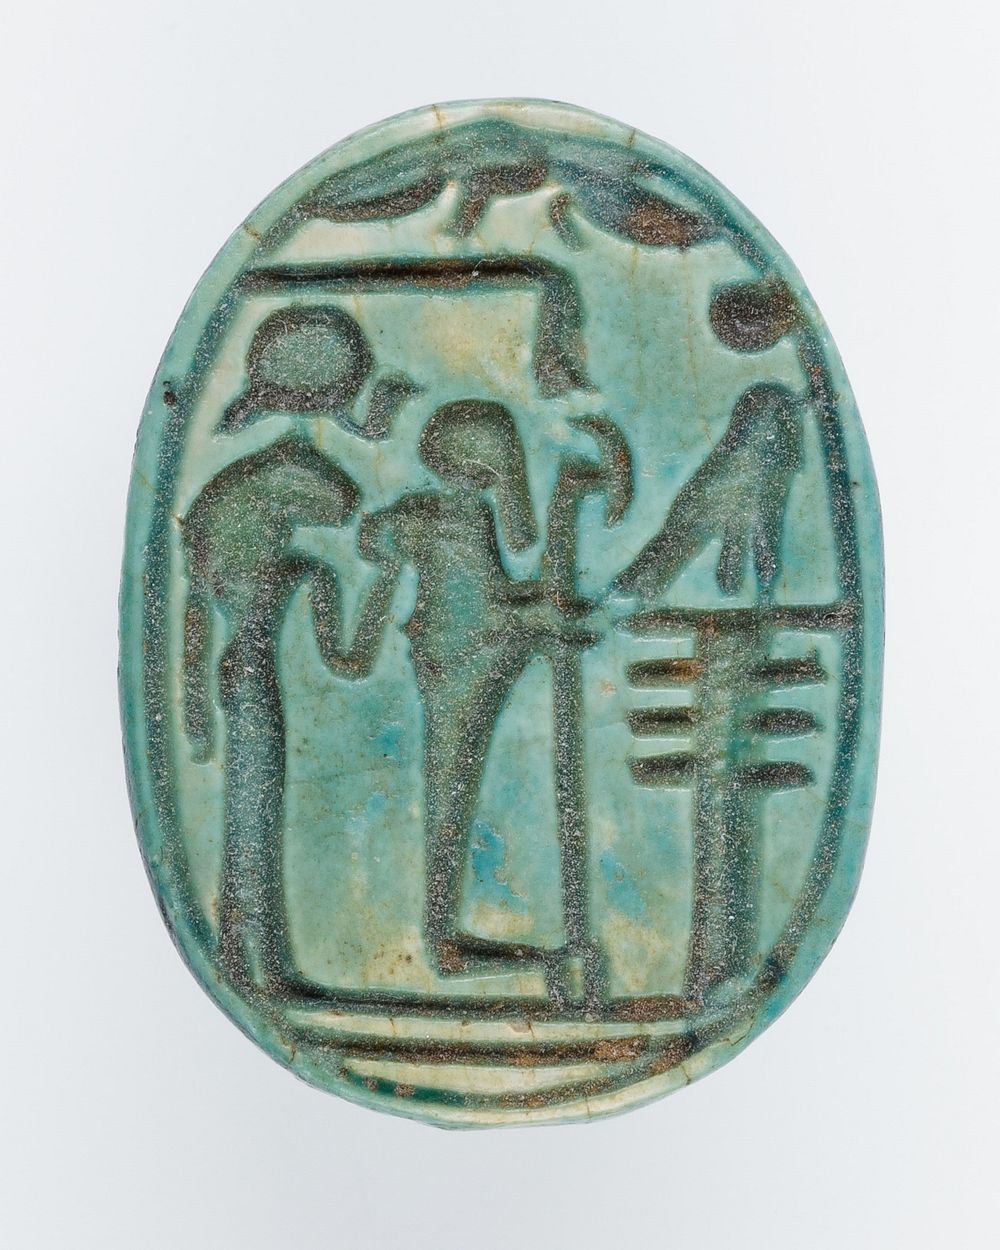 Scarab With an Image of the Gods Ptah and Sakhmet